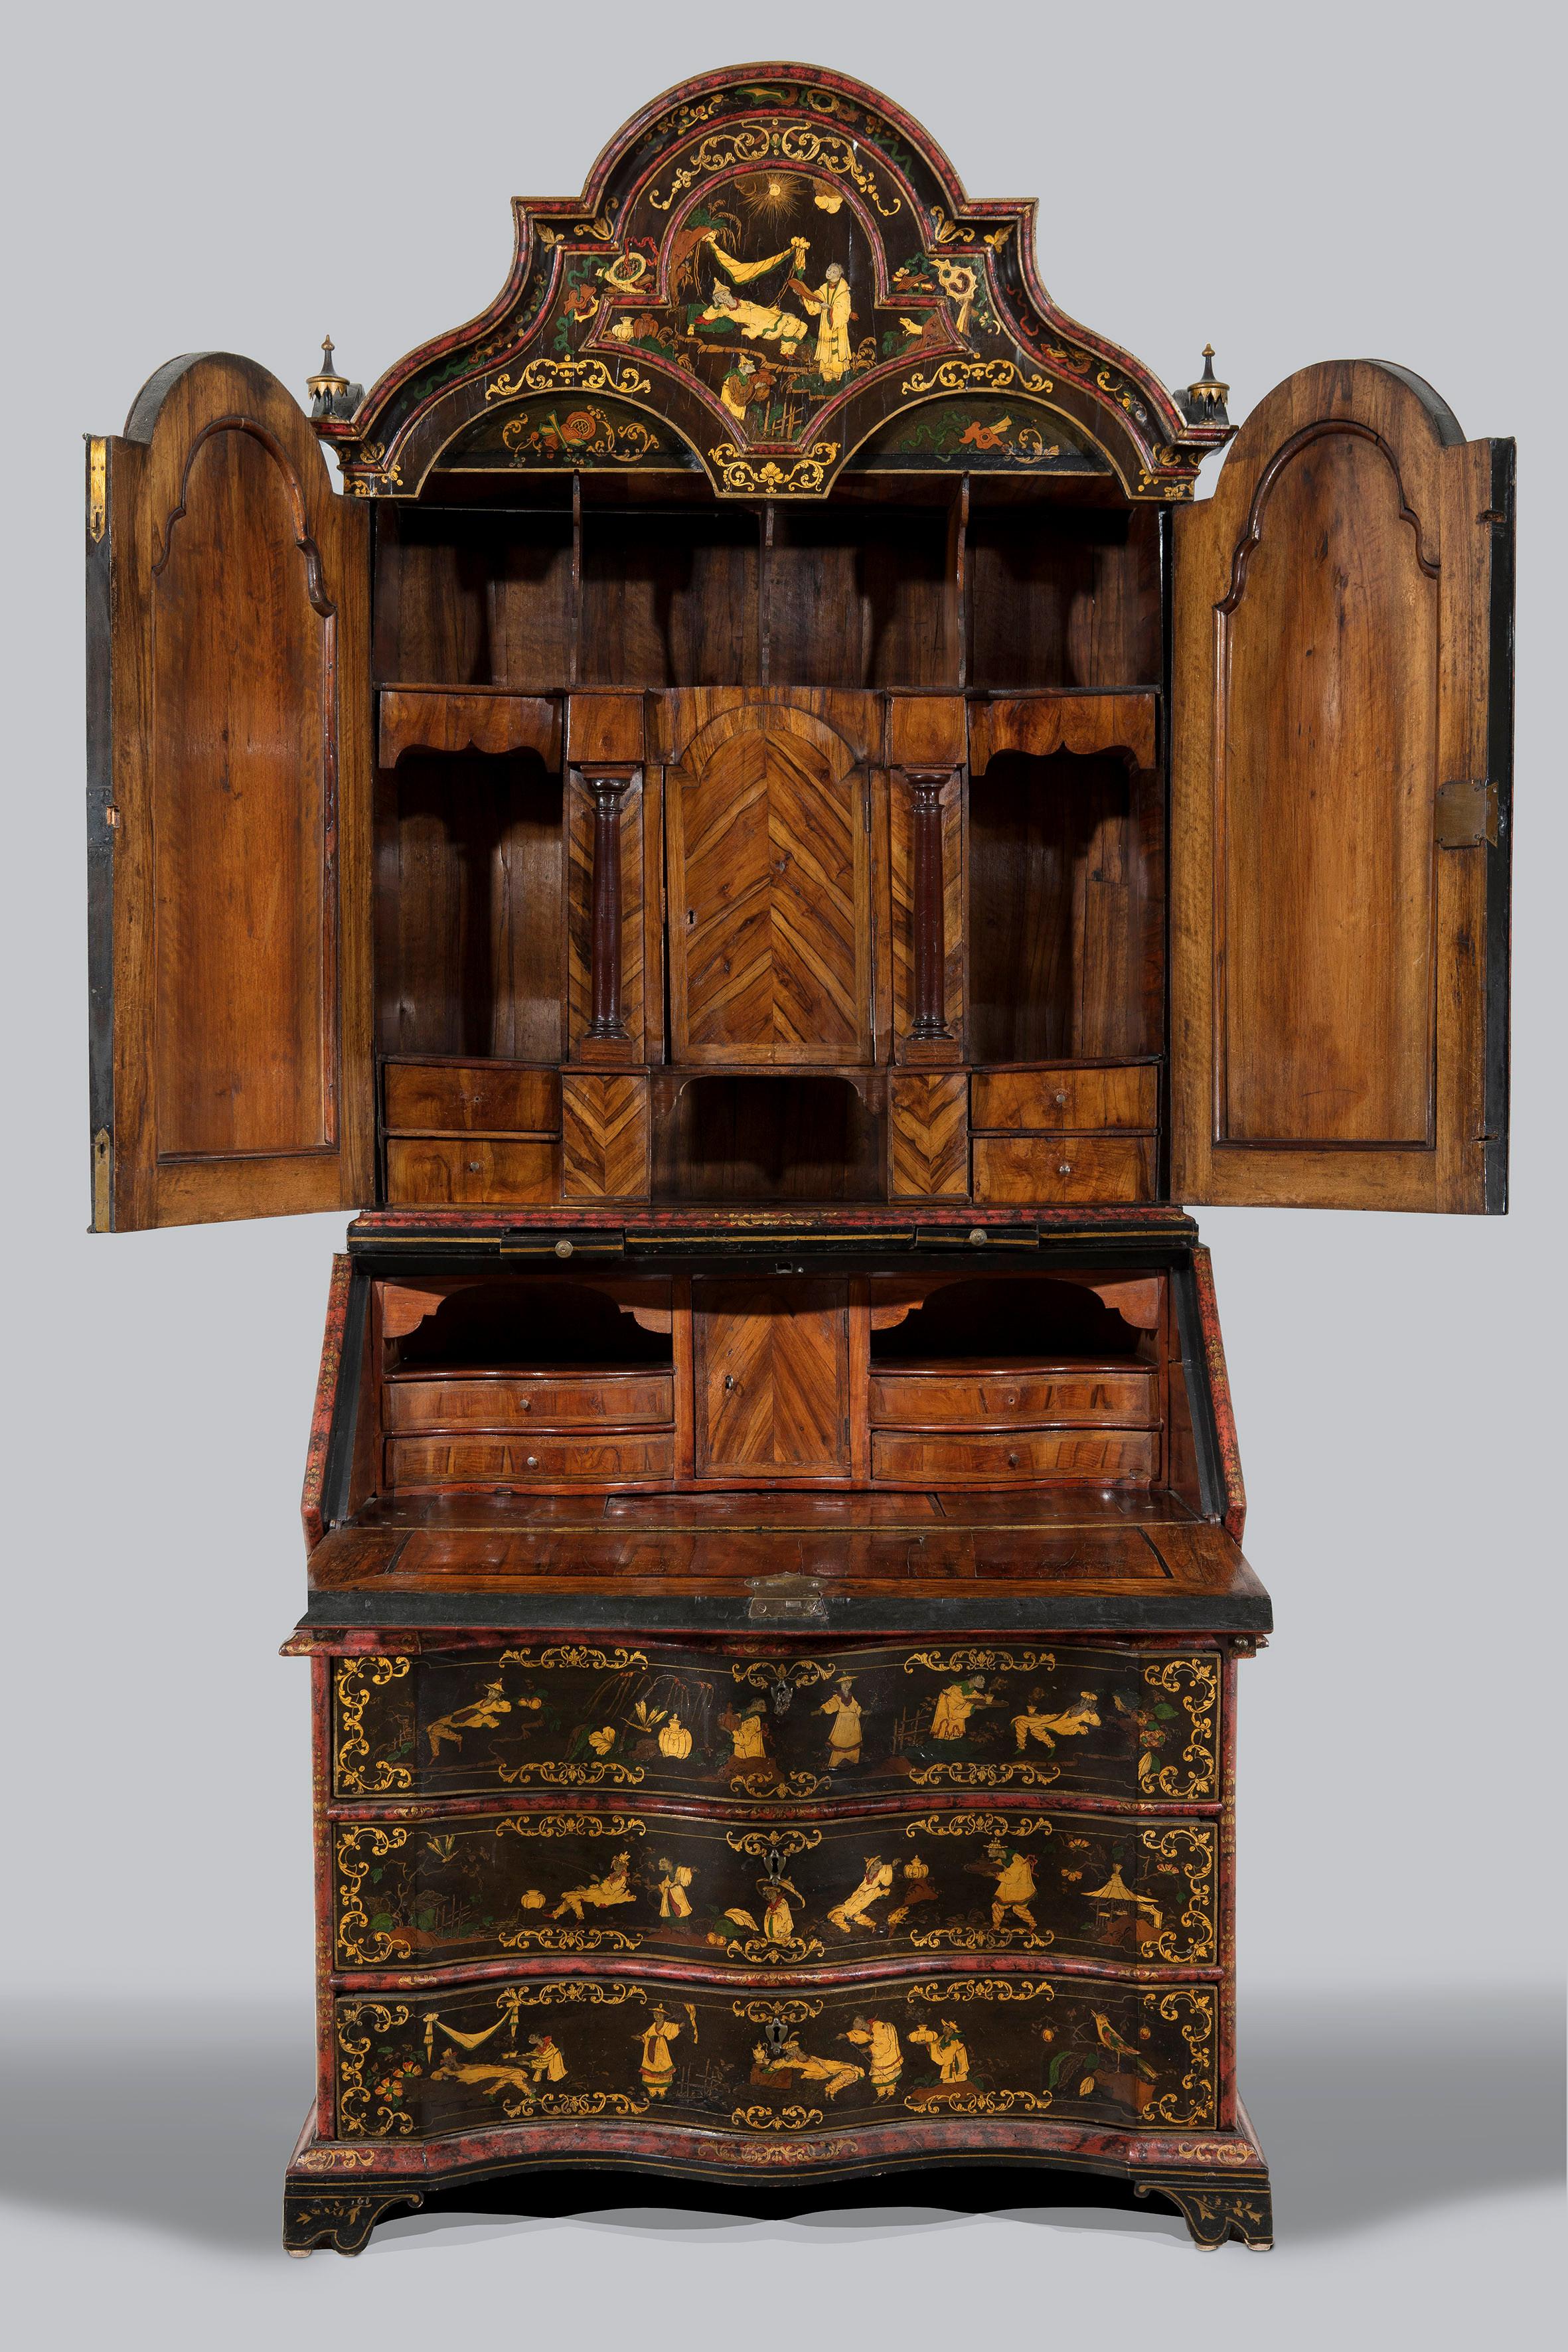 The piece of furniture decorated in polychrome lacquer, gilded with chinoiserie. Dark background, depict small scenes in groups of two or more characters taken in moments of rest in small landscapes, small architectures, plant shoots, turf, birds,